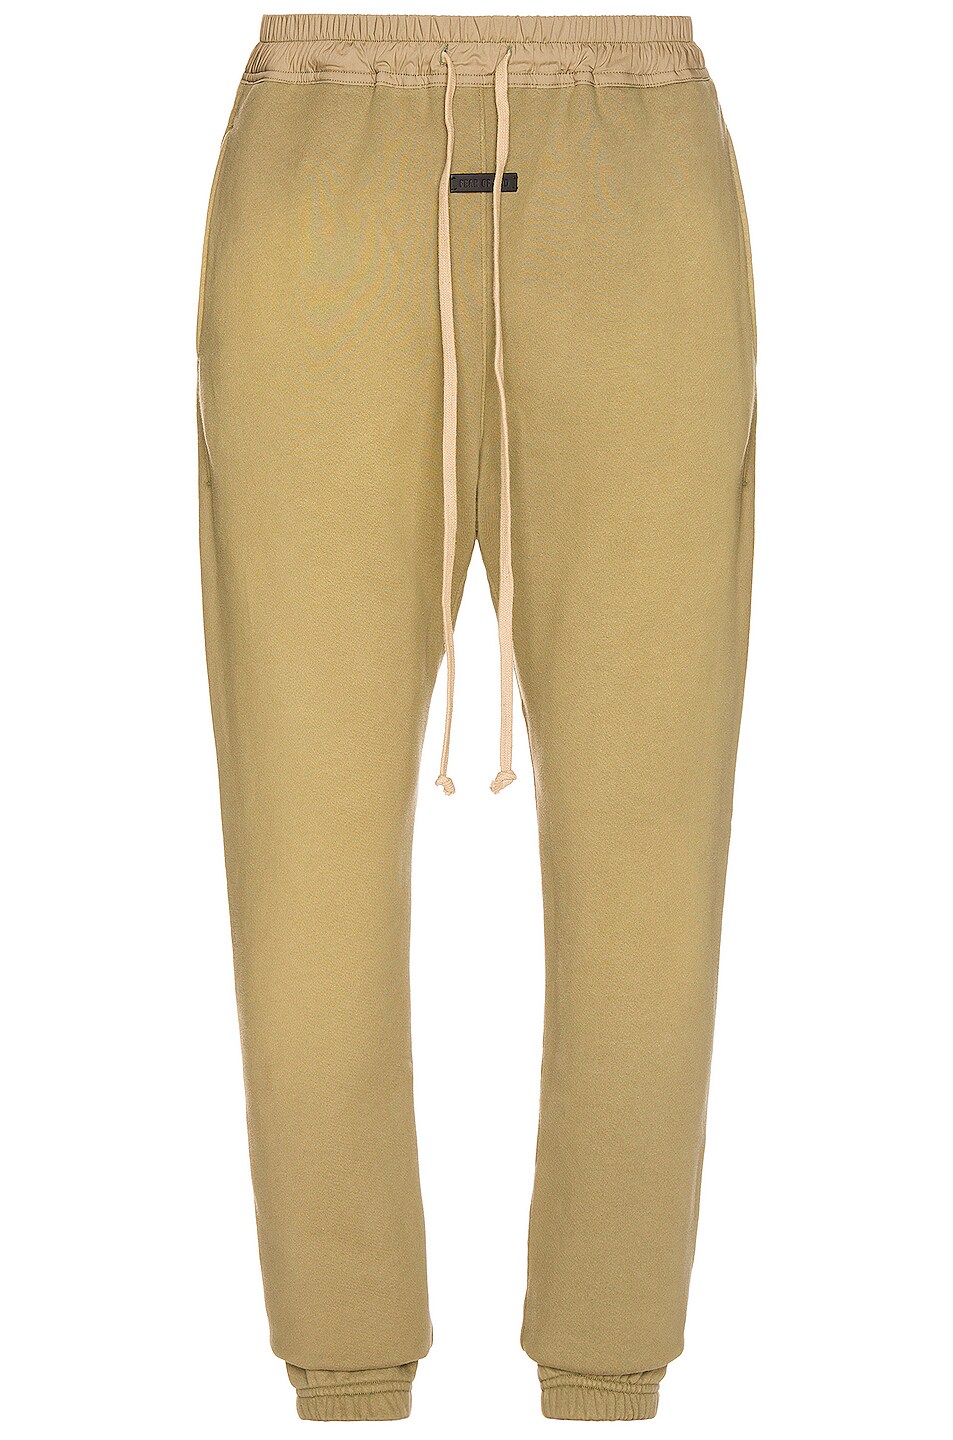 Image 1 of Fear of God The Vintage Sweatpant in Vintage Army